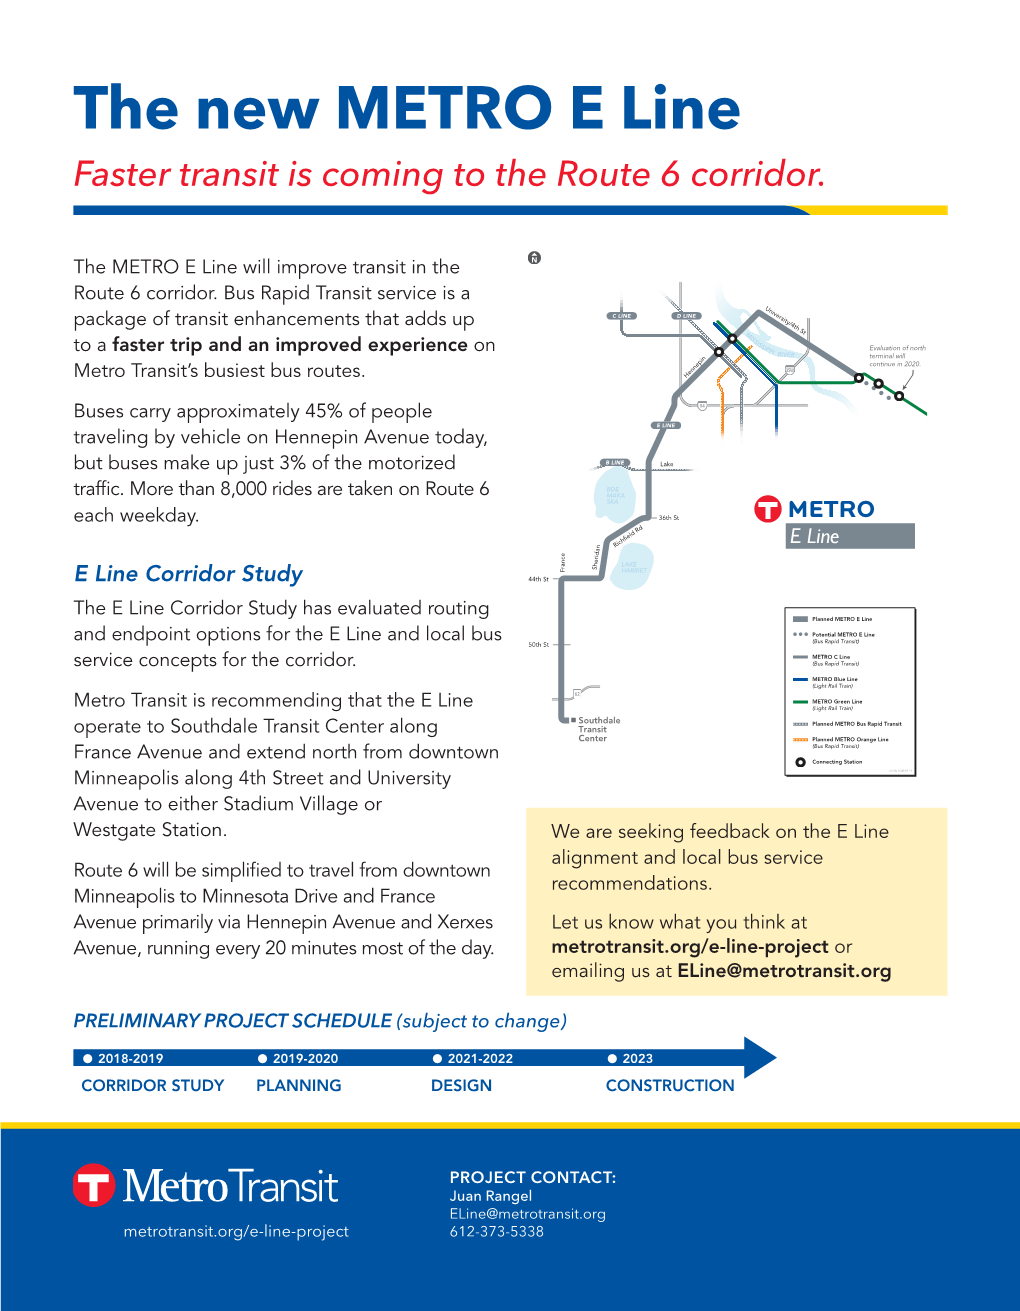 The New METRO E Line Faster Transit Is Coming to the Route 6 Corridor